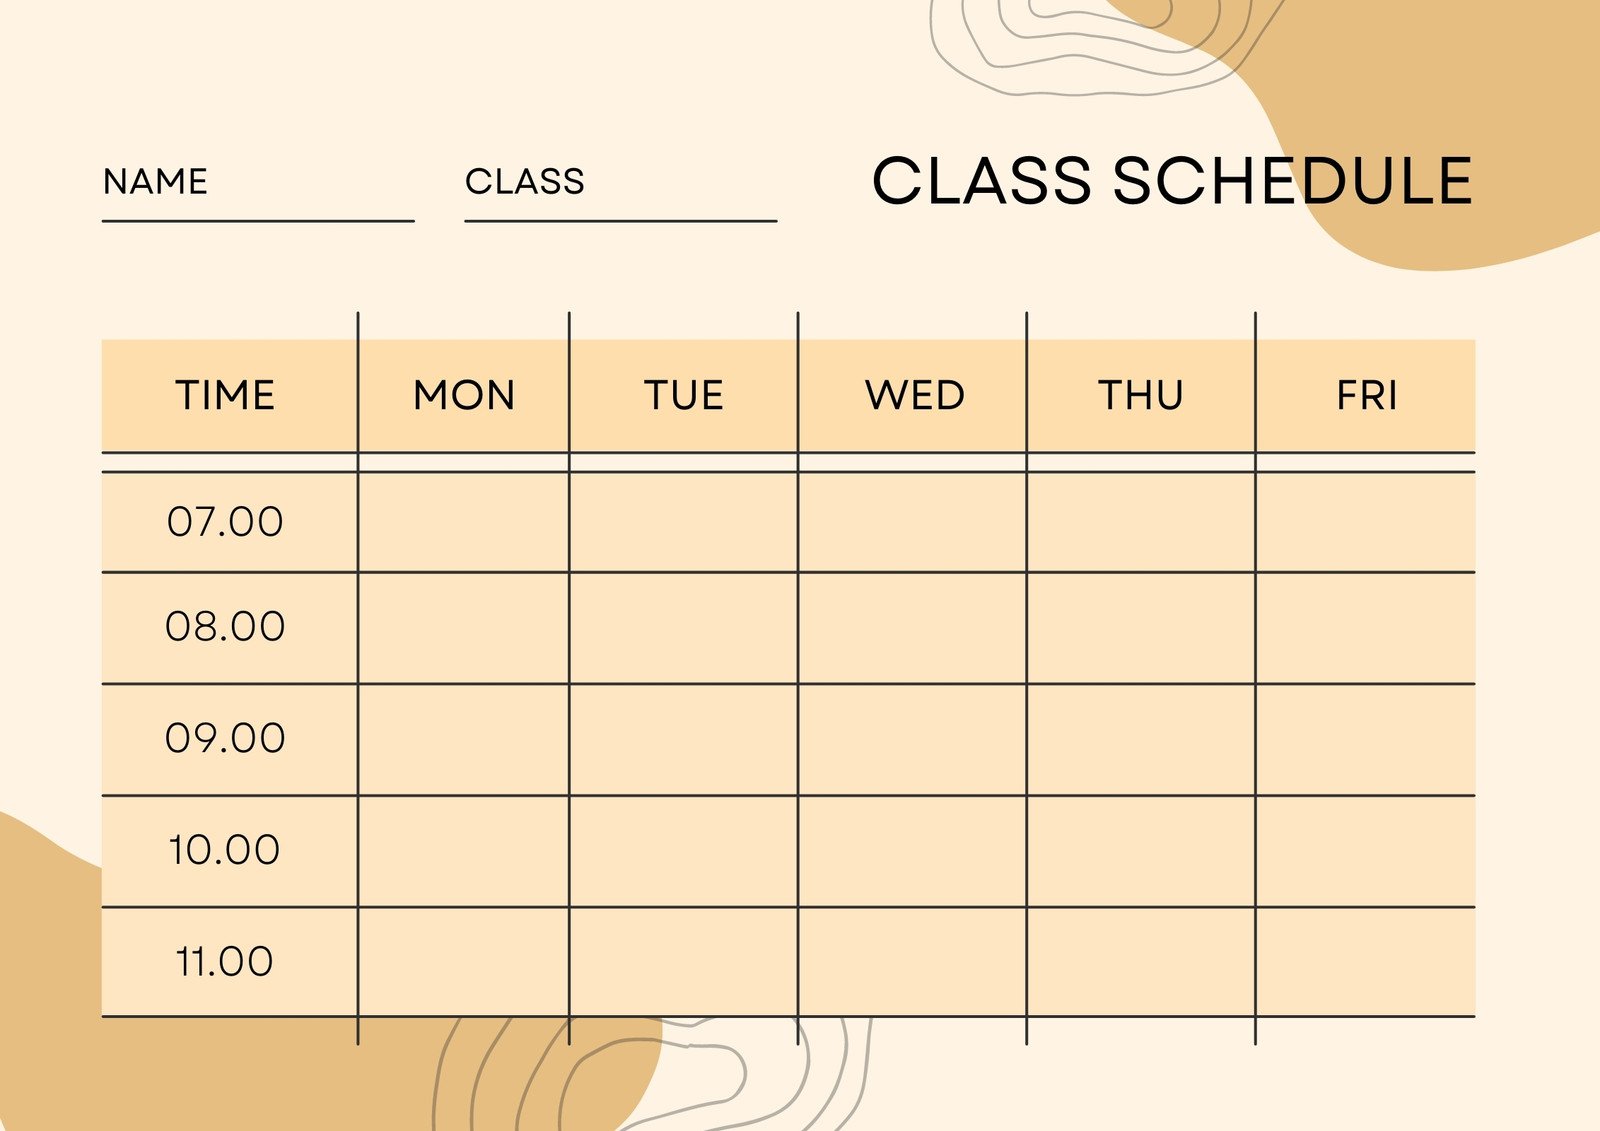 free-printable-class-schedule-templates-to-customize-canva-free-blank-printable-class-schedule